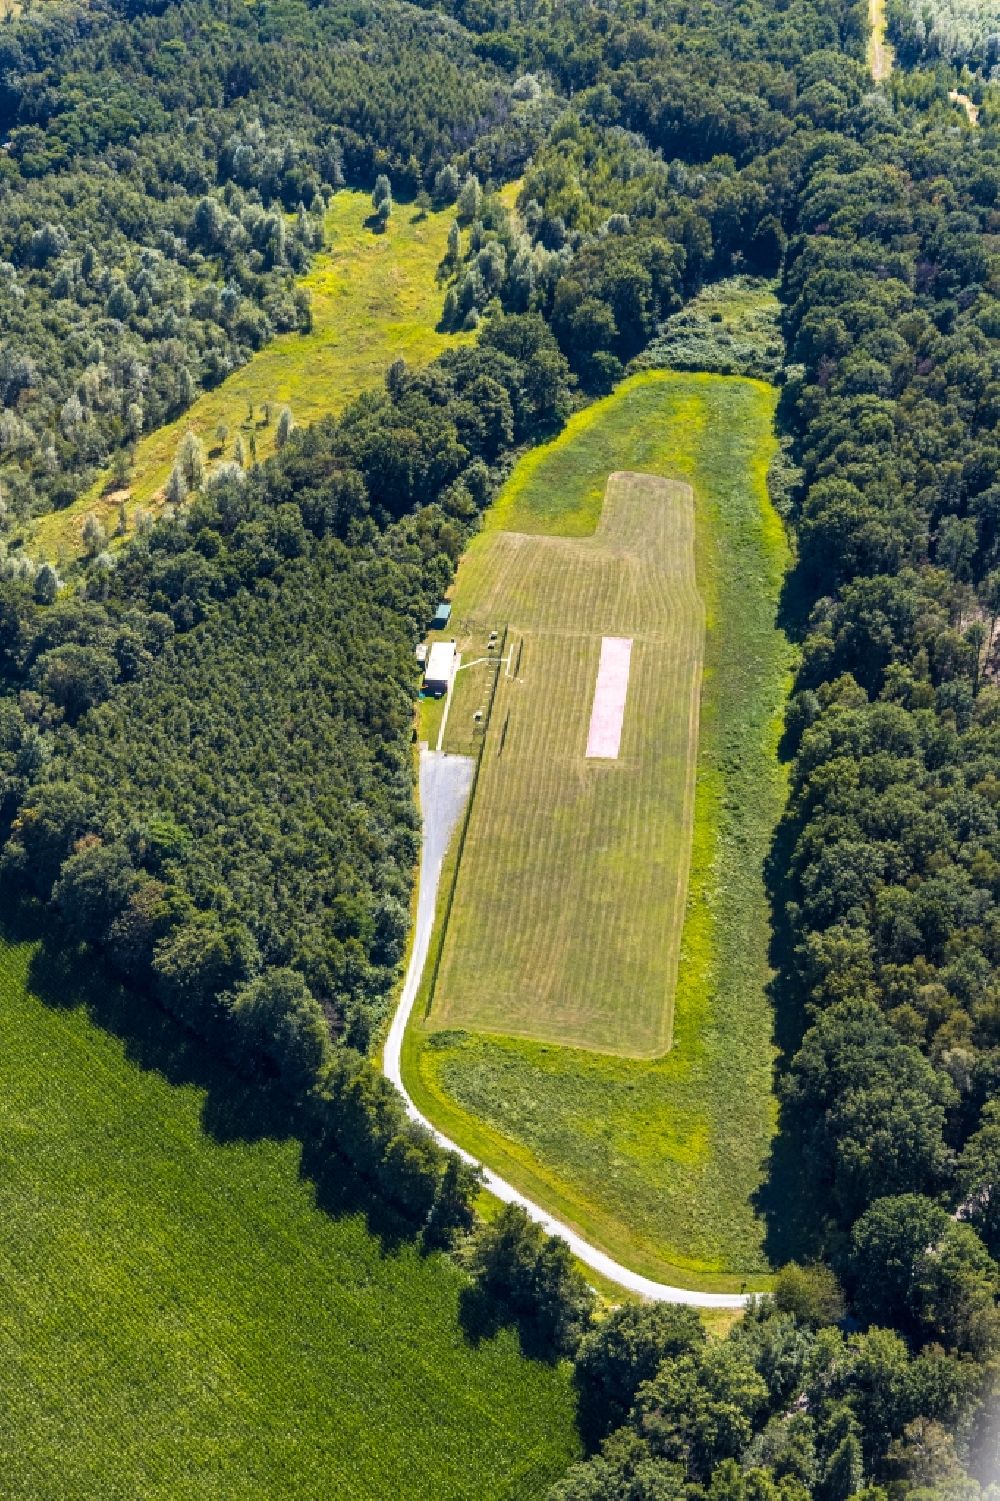 Bottrop from the bird's eye view: Structures on agricultural fields surrounded by forest in Bottrop in the state North Rhine-Westphalia, Germany